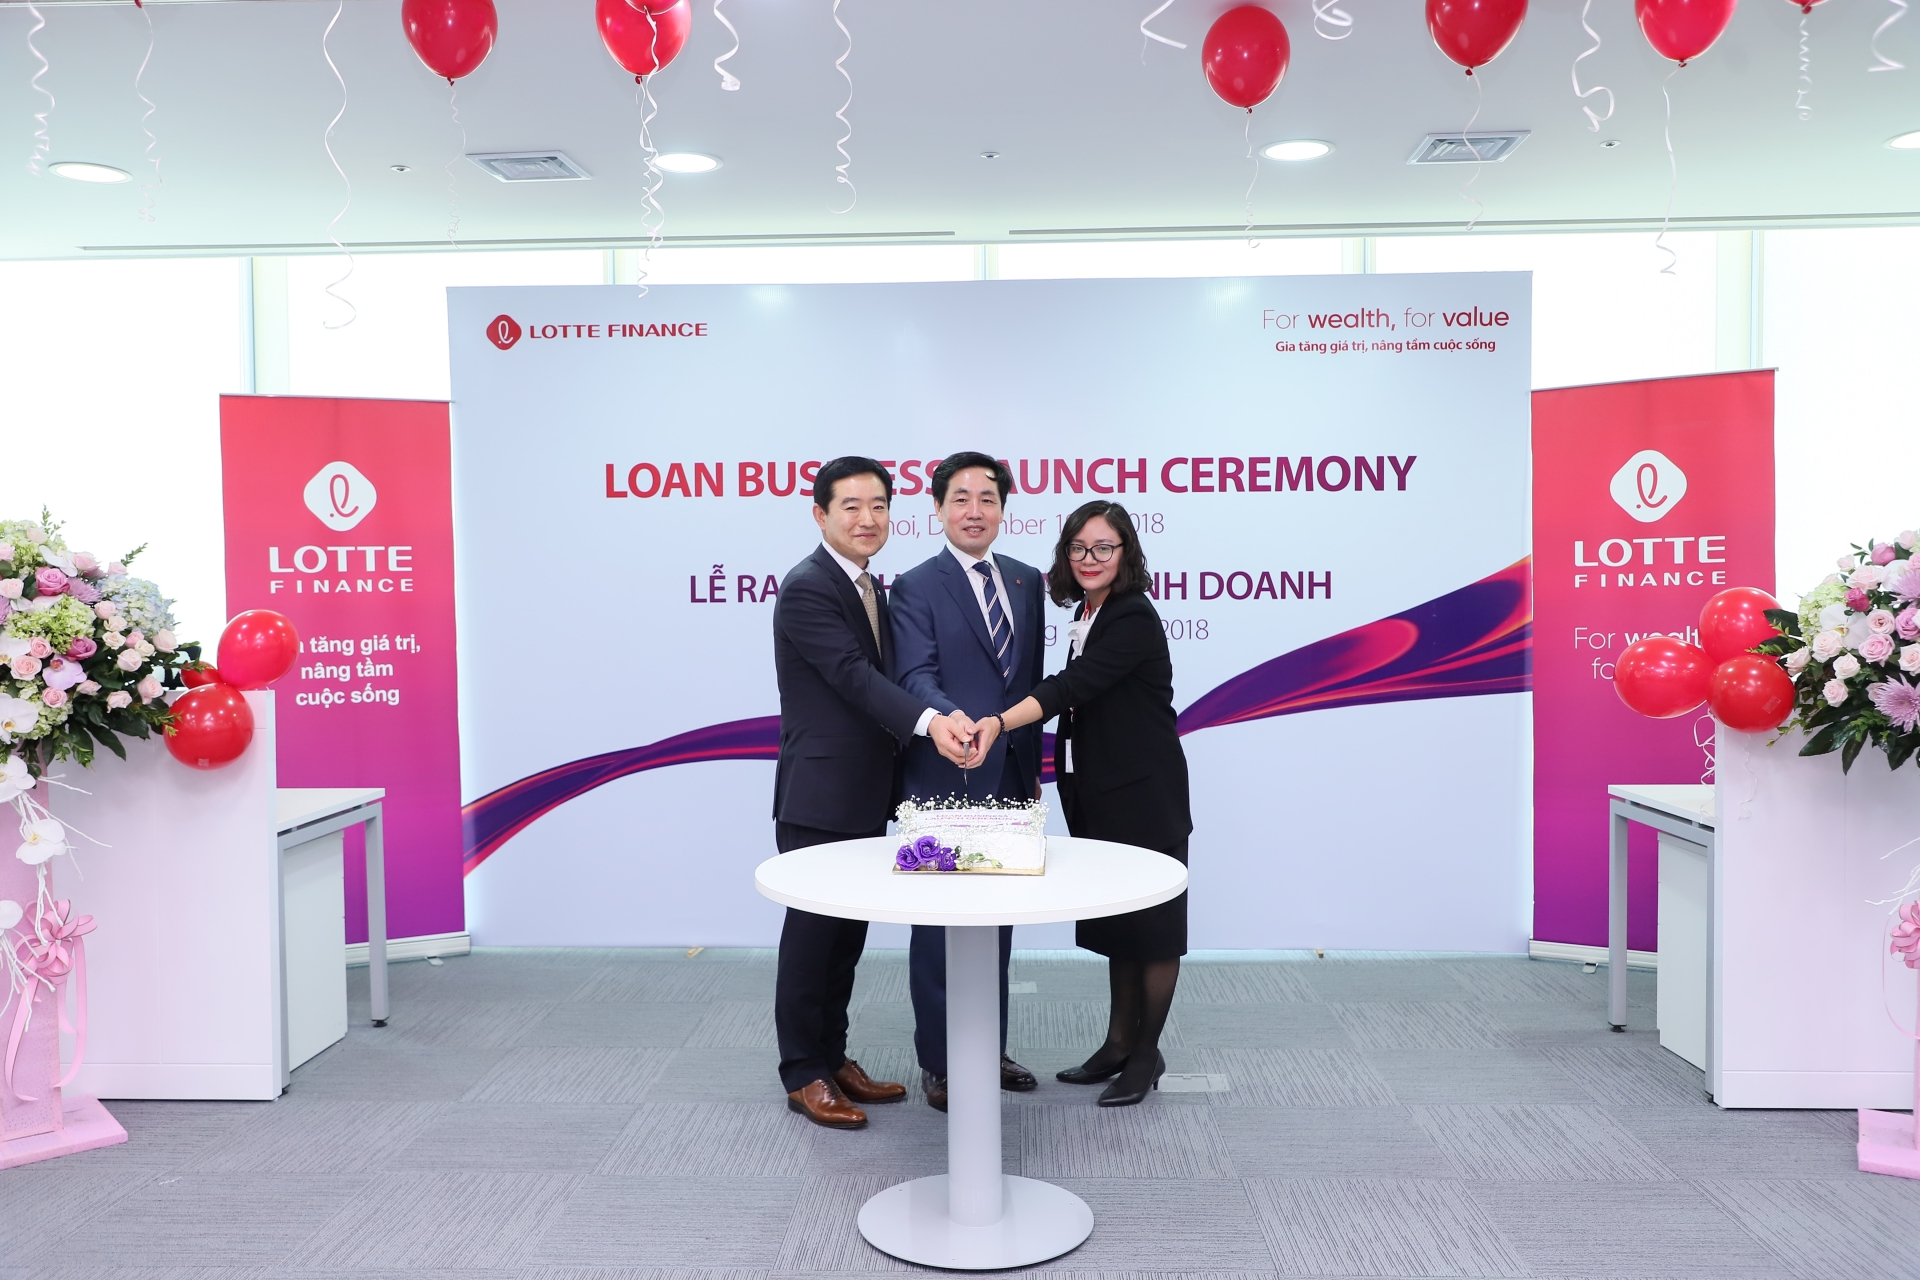 Lotte Finance officially launches consumer loan services in Vietnam